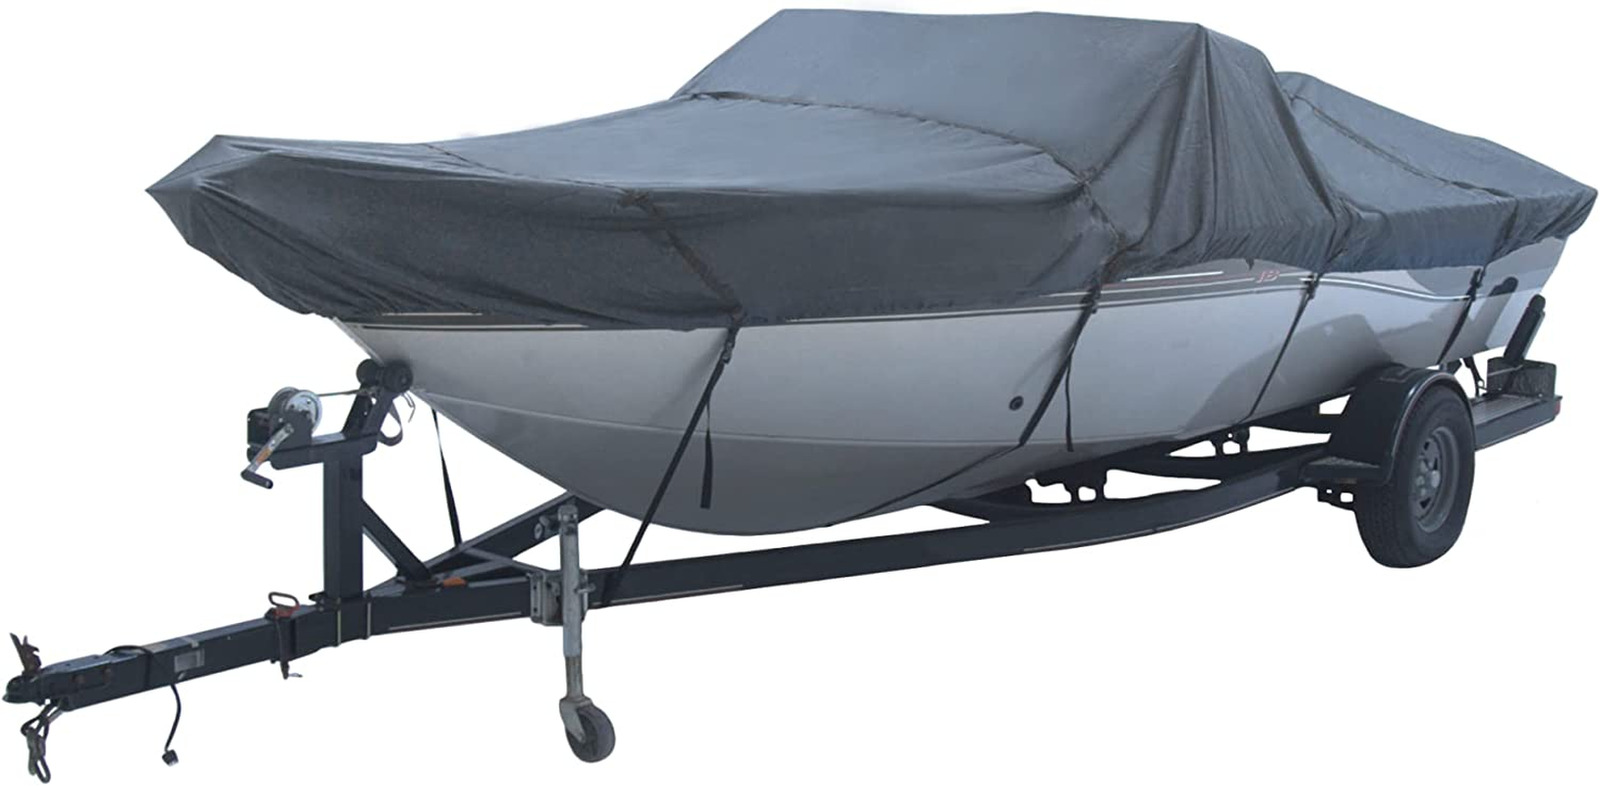 V Hull Boat Cover, Premium Boat Accessories 16-18.5Ft Boat Cover, 600D Marine Gr